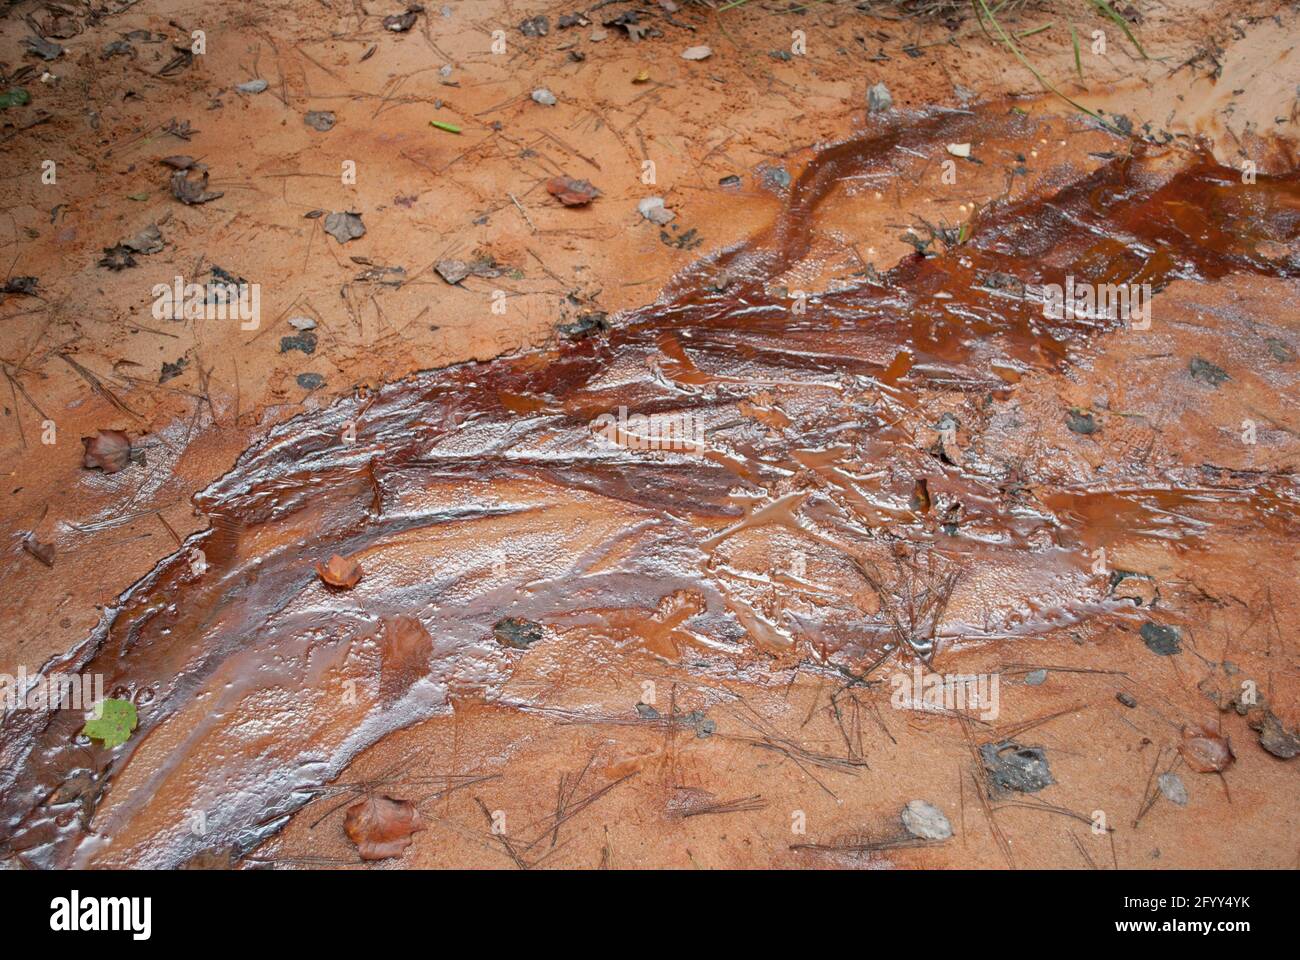 Large colorful spot of oil on the ground. Oilfield Stock Photo